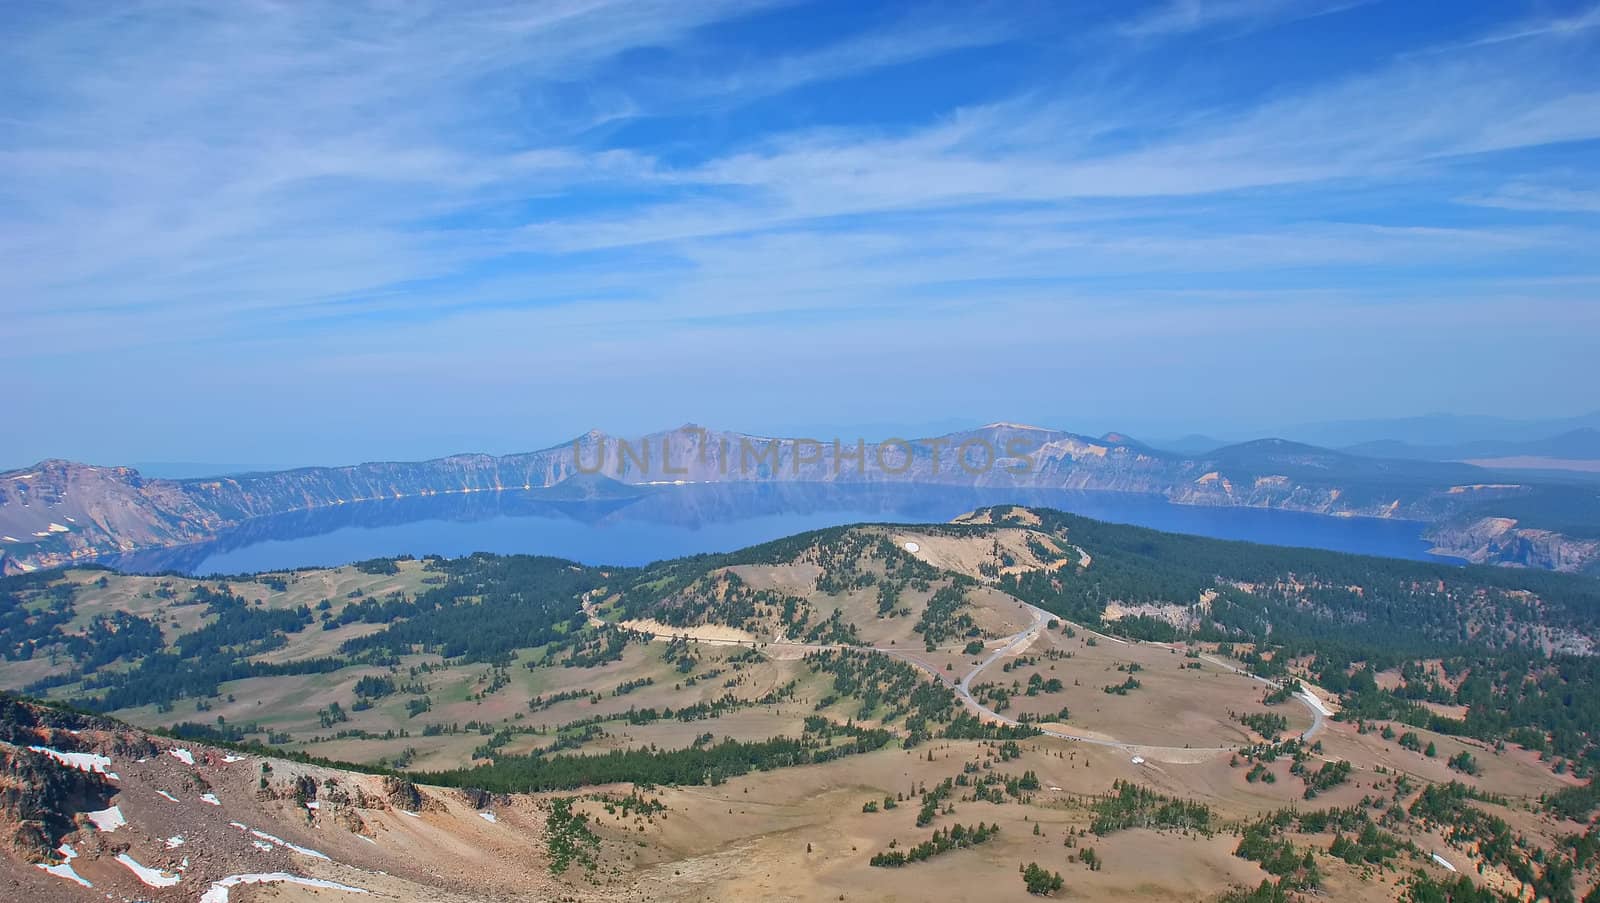 Crater Lake view from Mount Scott summit, Crater Lake National Park, Summer, Oregon, United States